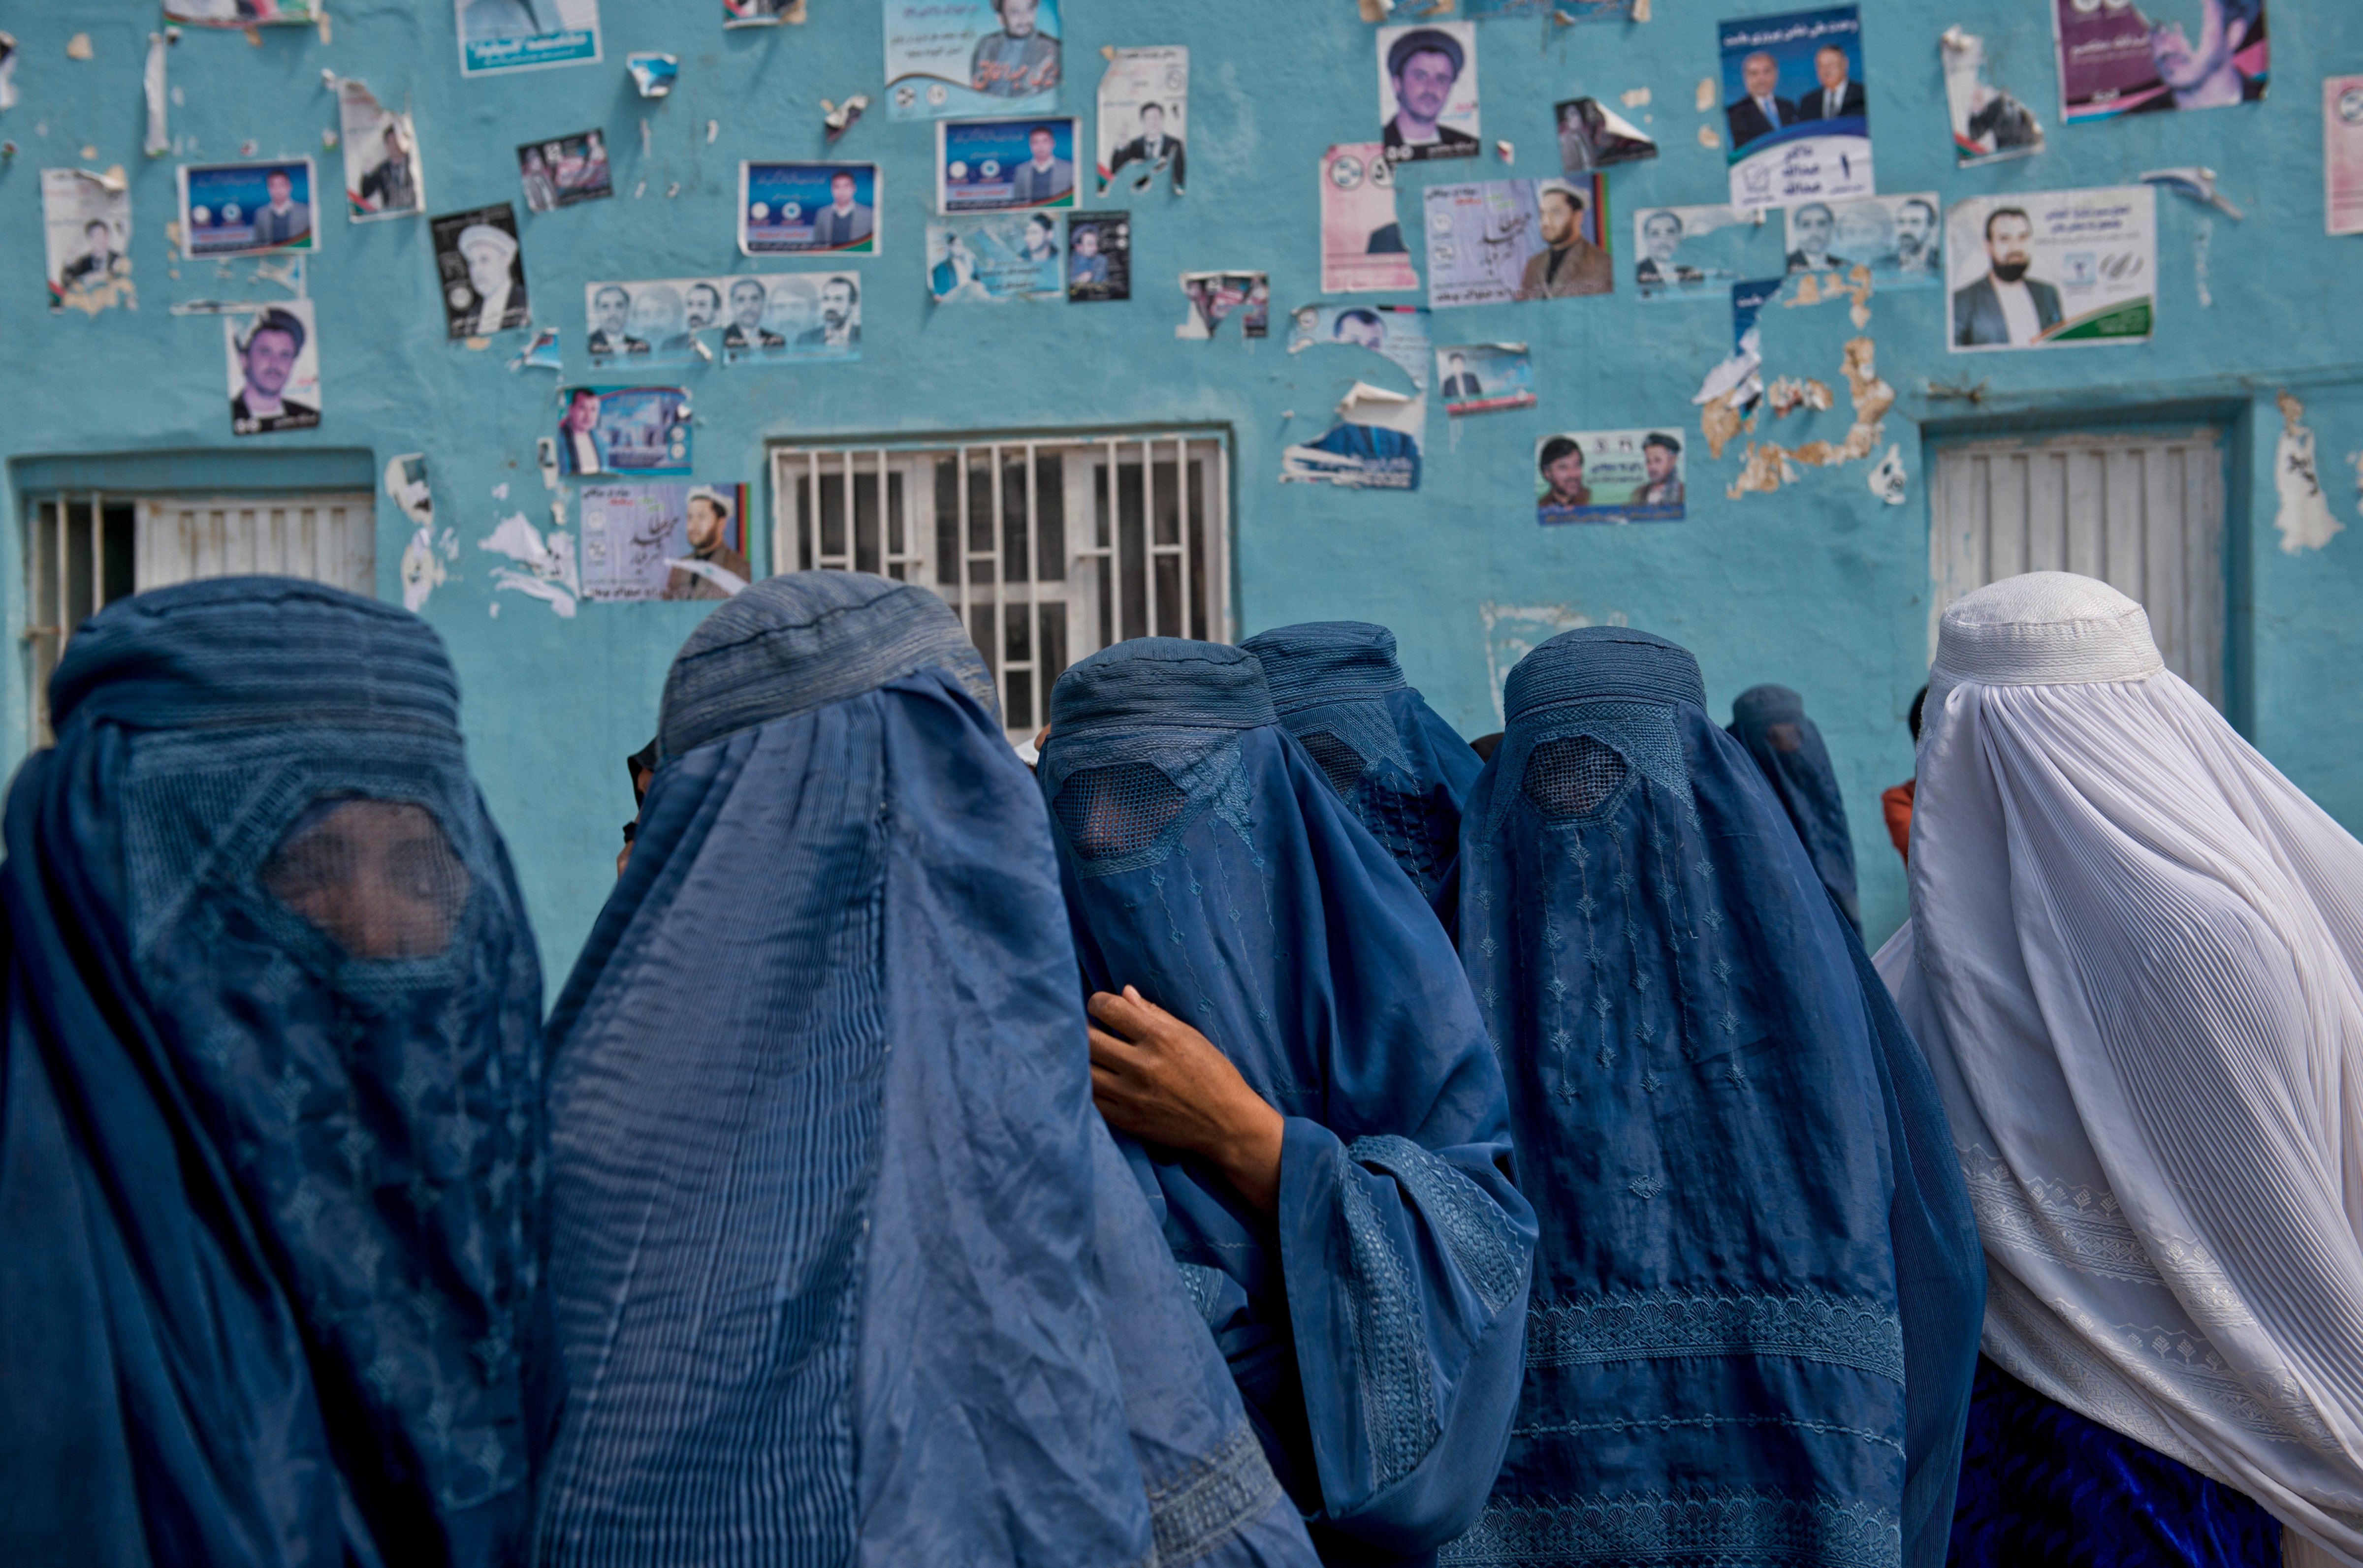 <strong>Election Fever</strong> Women leave a political rally held in a stadium in Mazar-i-Sharif in the country’s north. (Lynsey Addario for TIME)